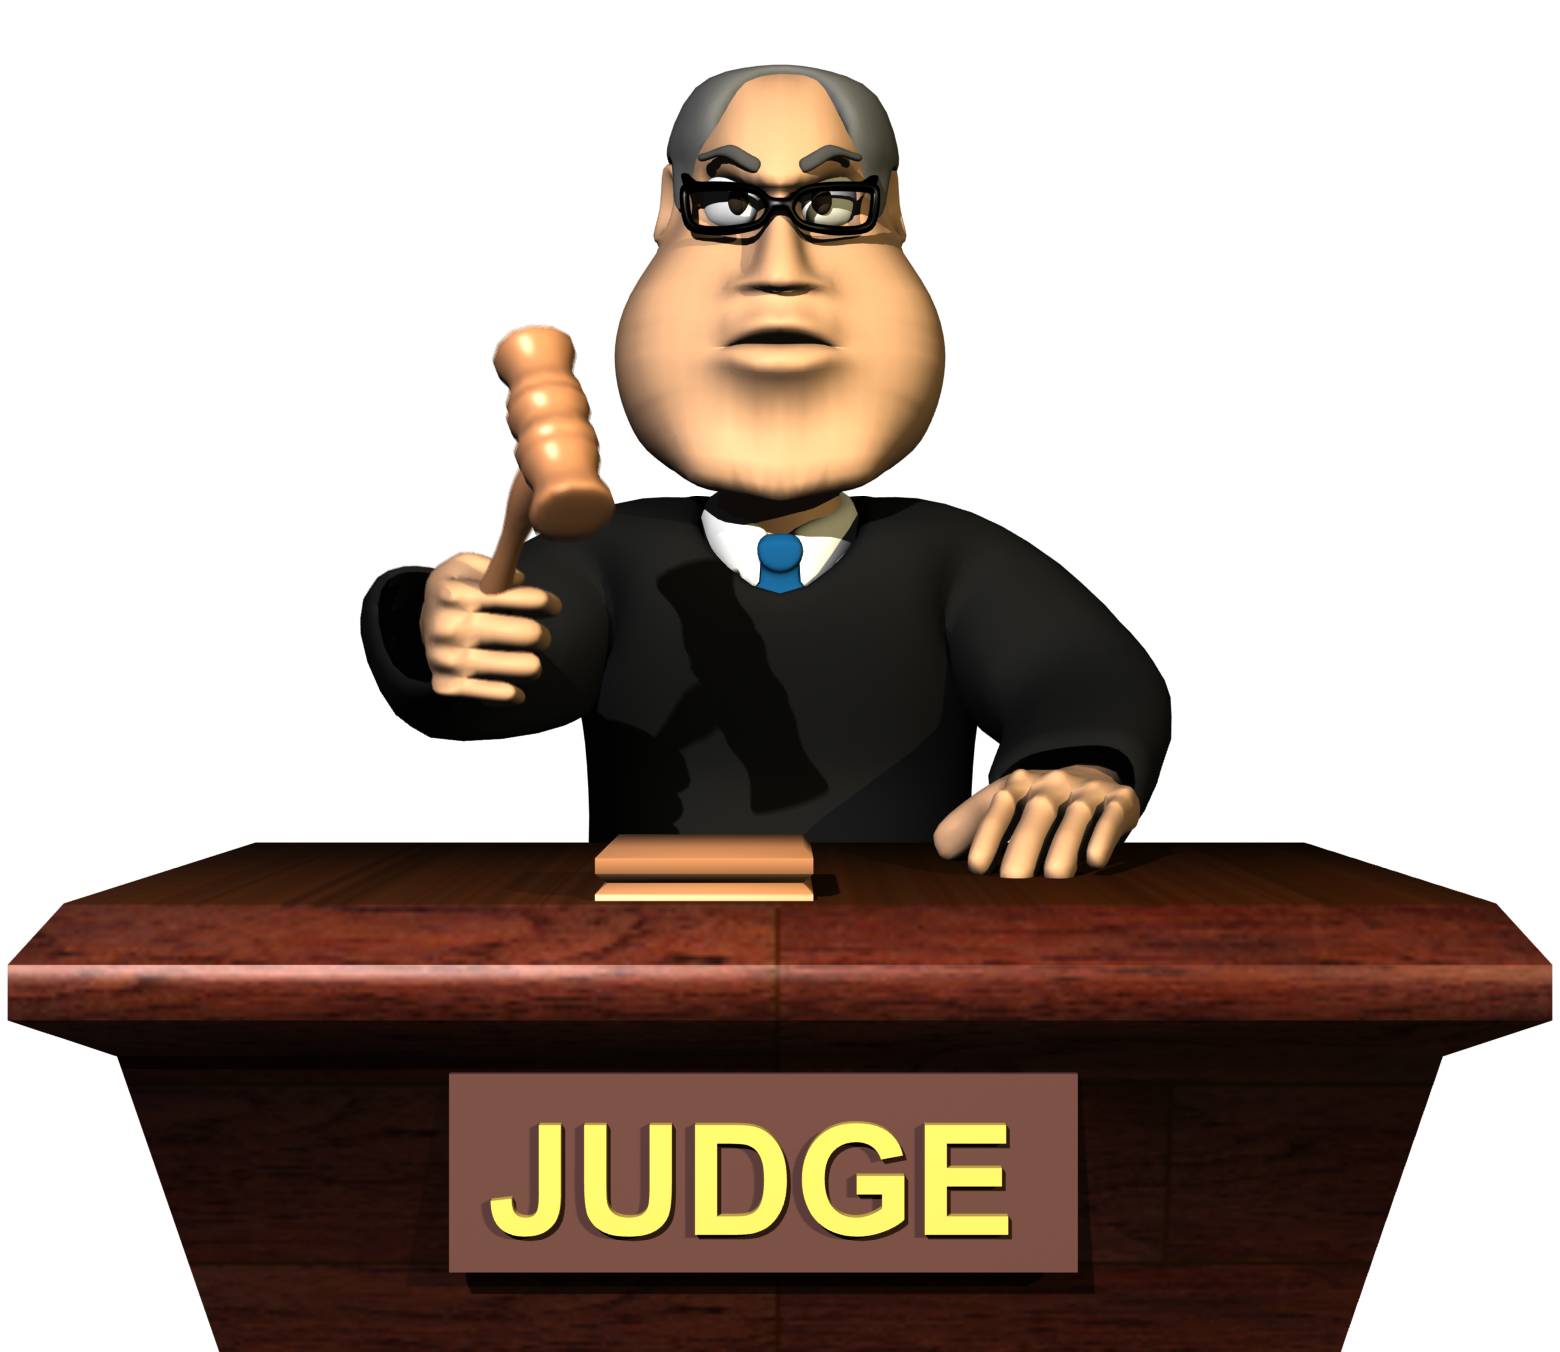 view all Judge Cliparts). 